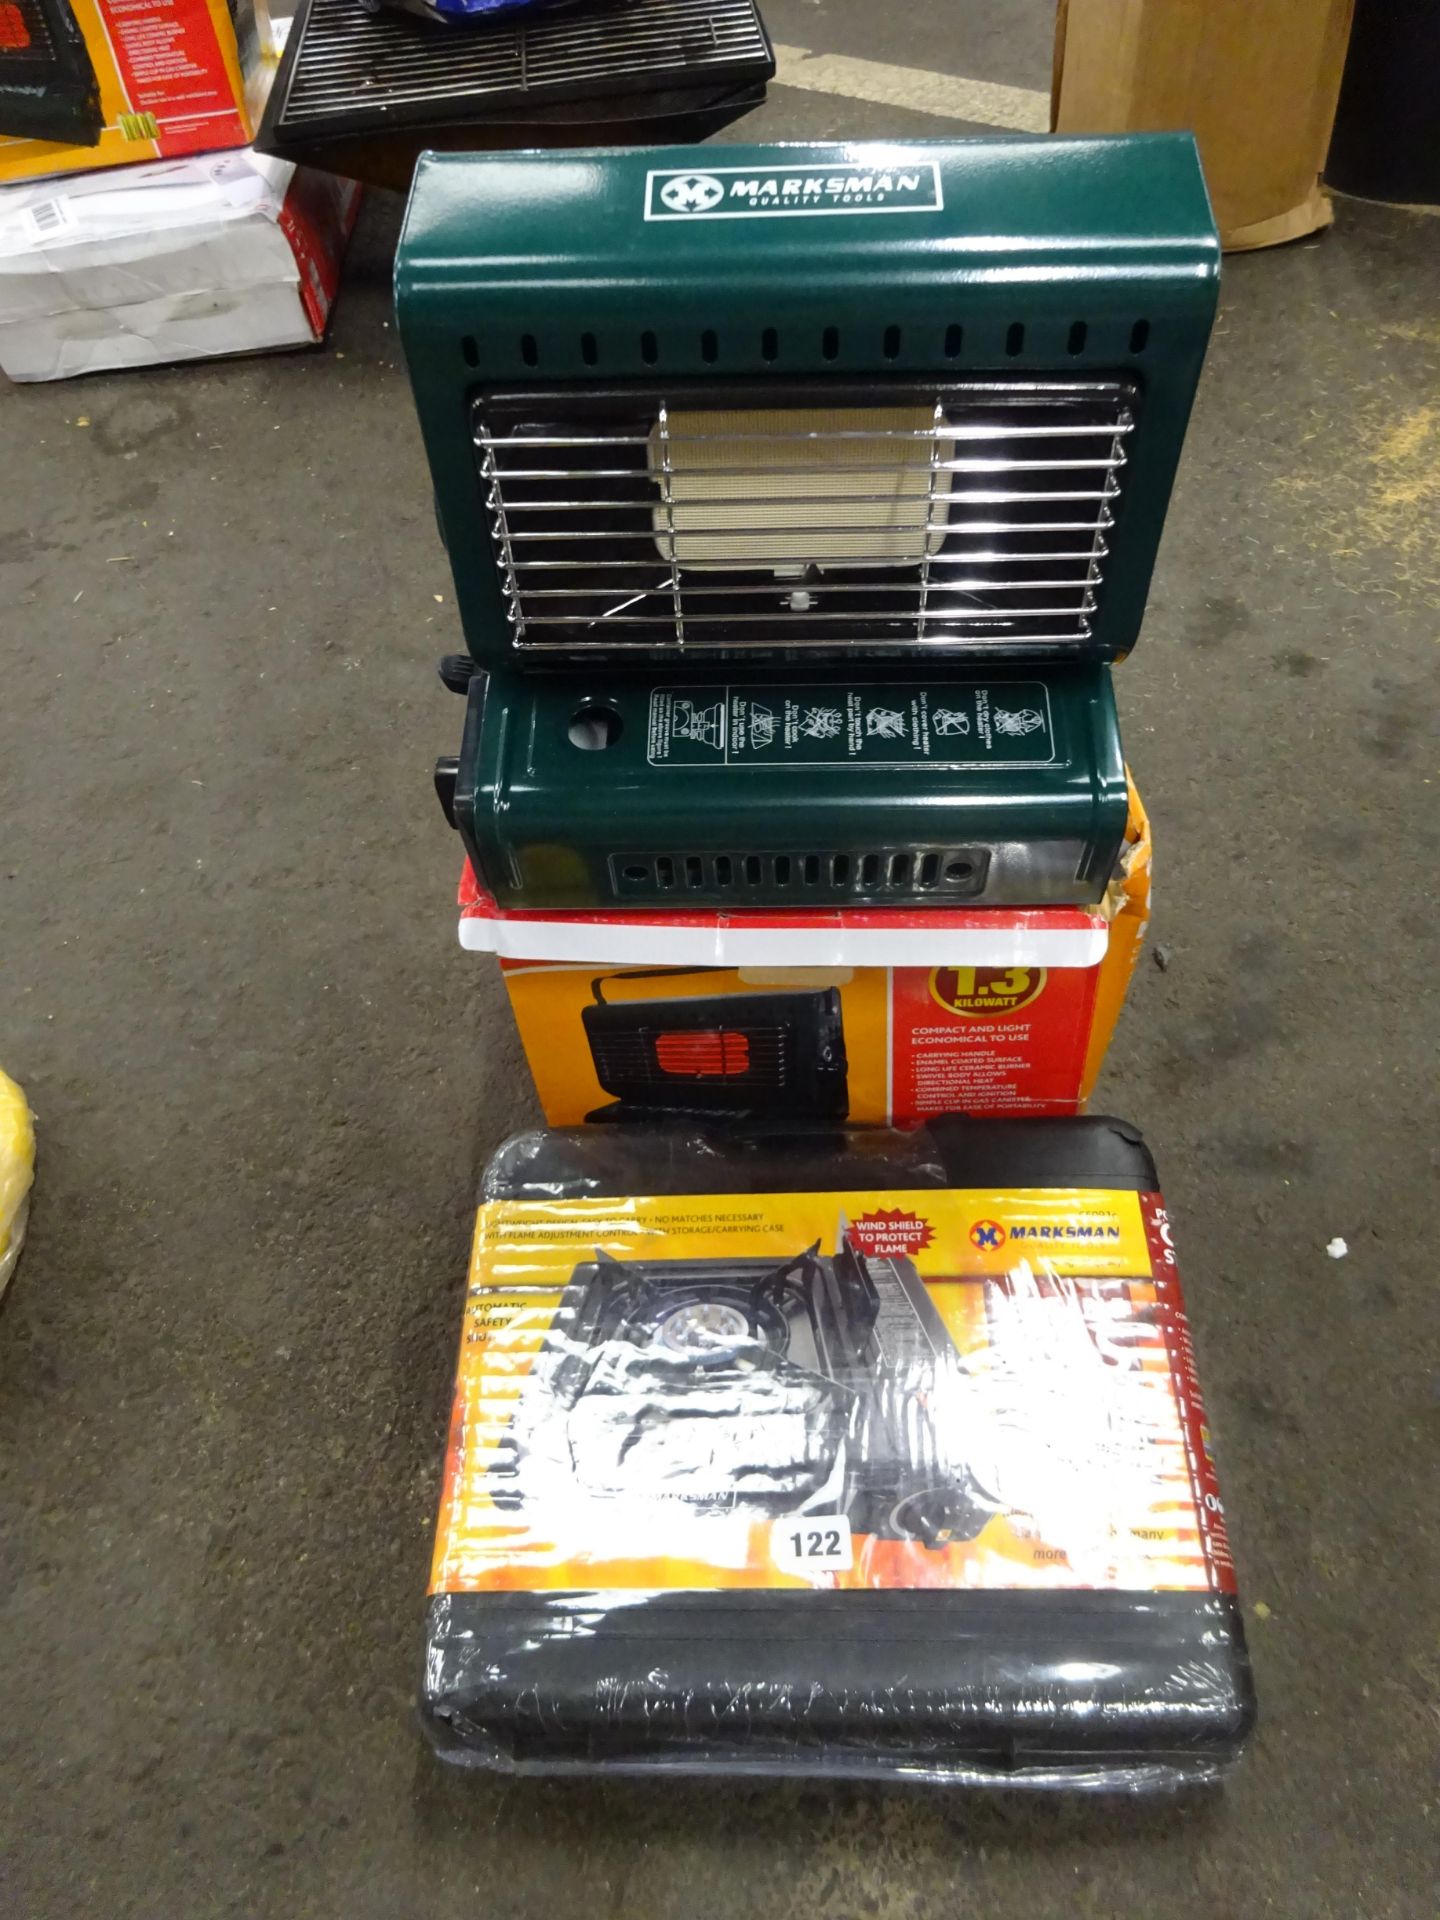 GAS STOVE & GAS HEATER